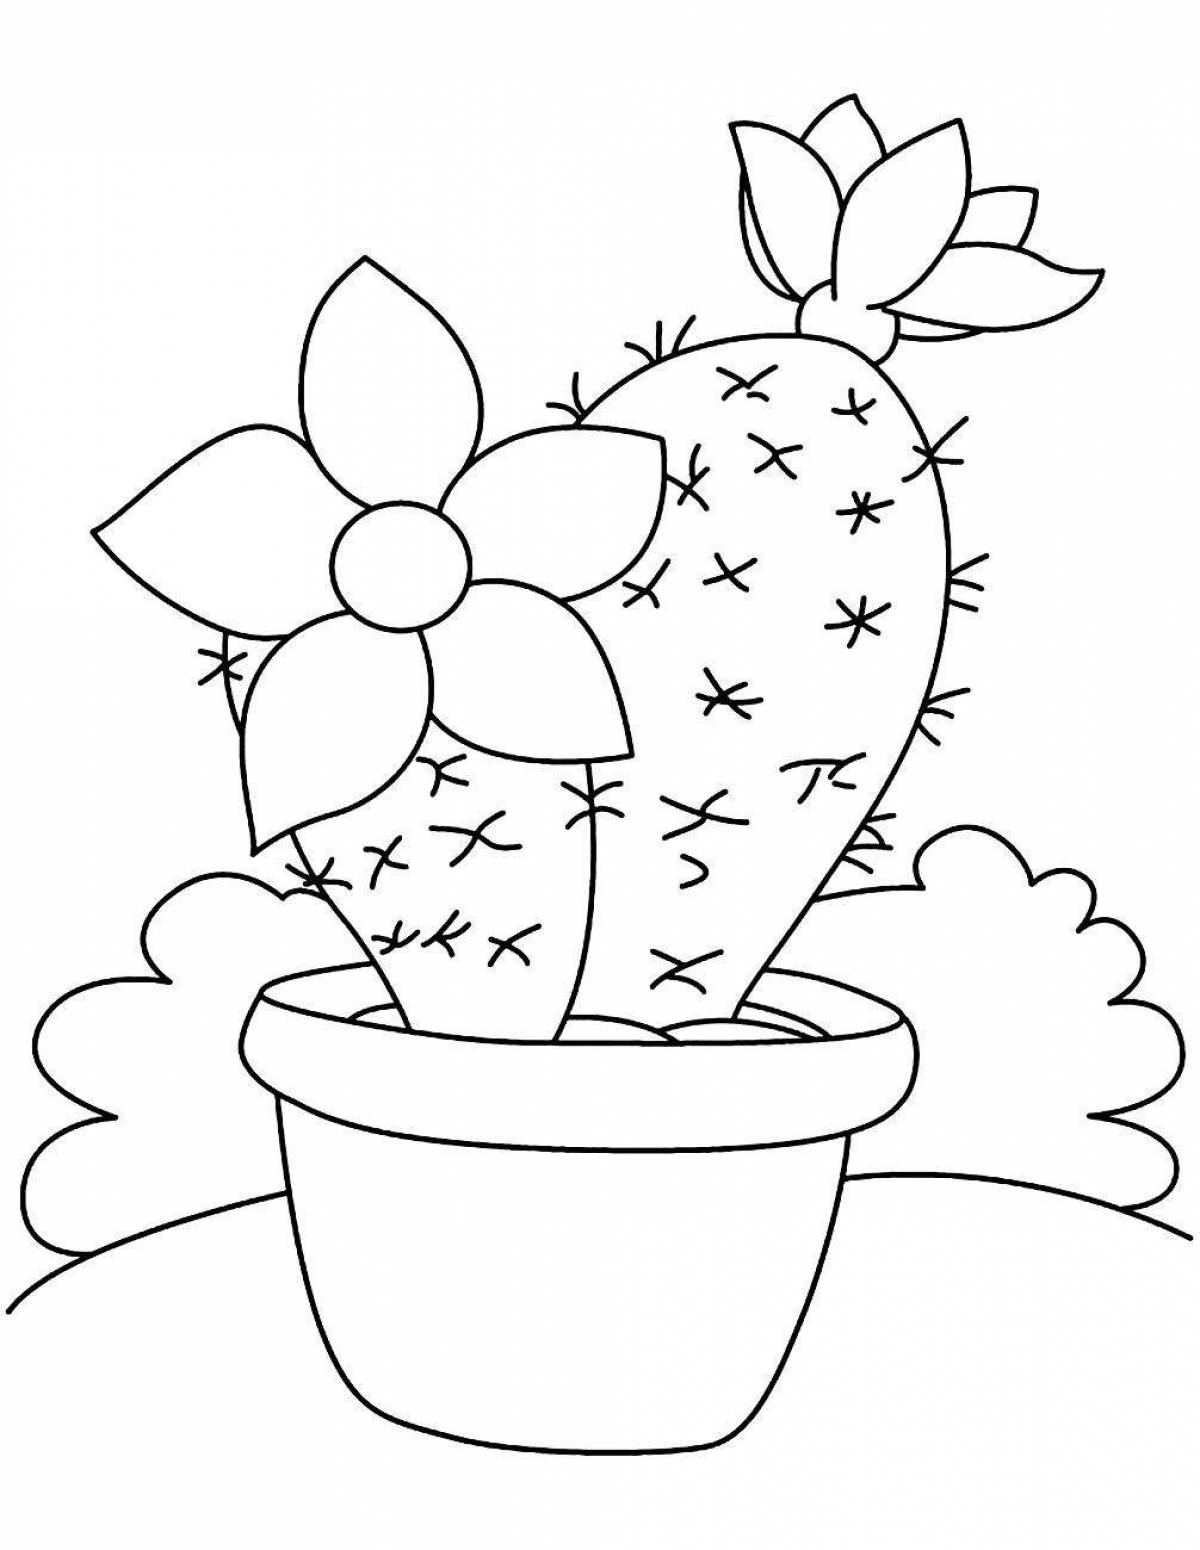 Exotic cactus in a pot for children